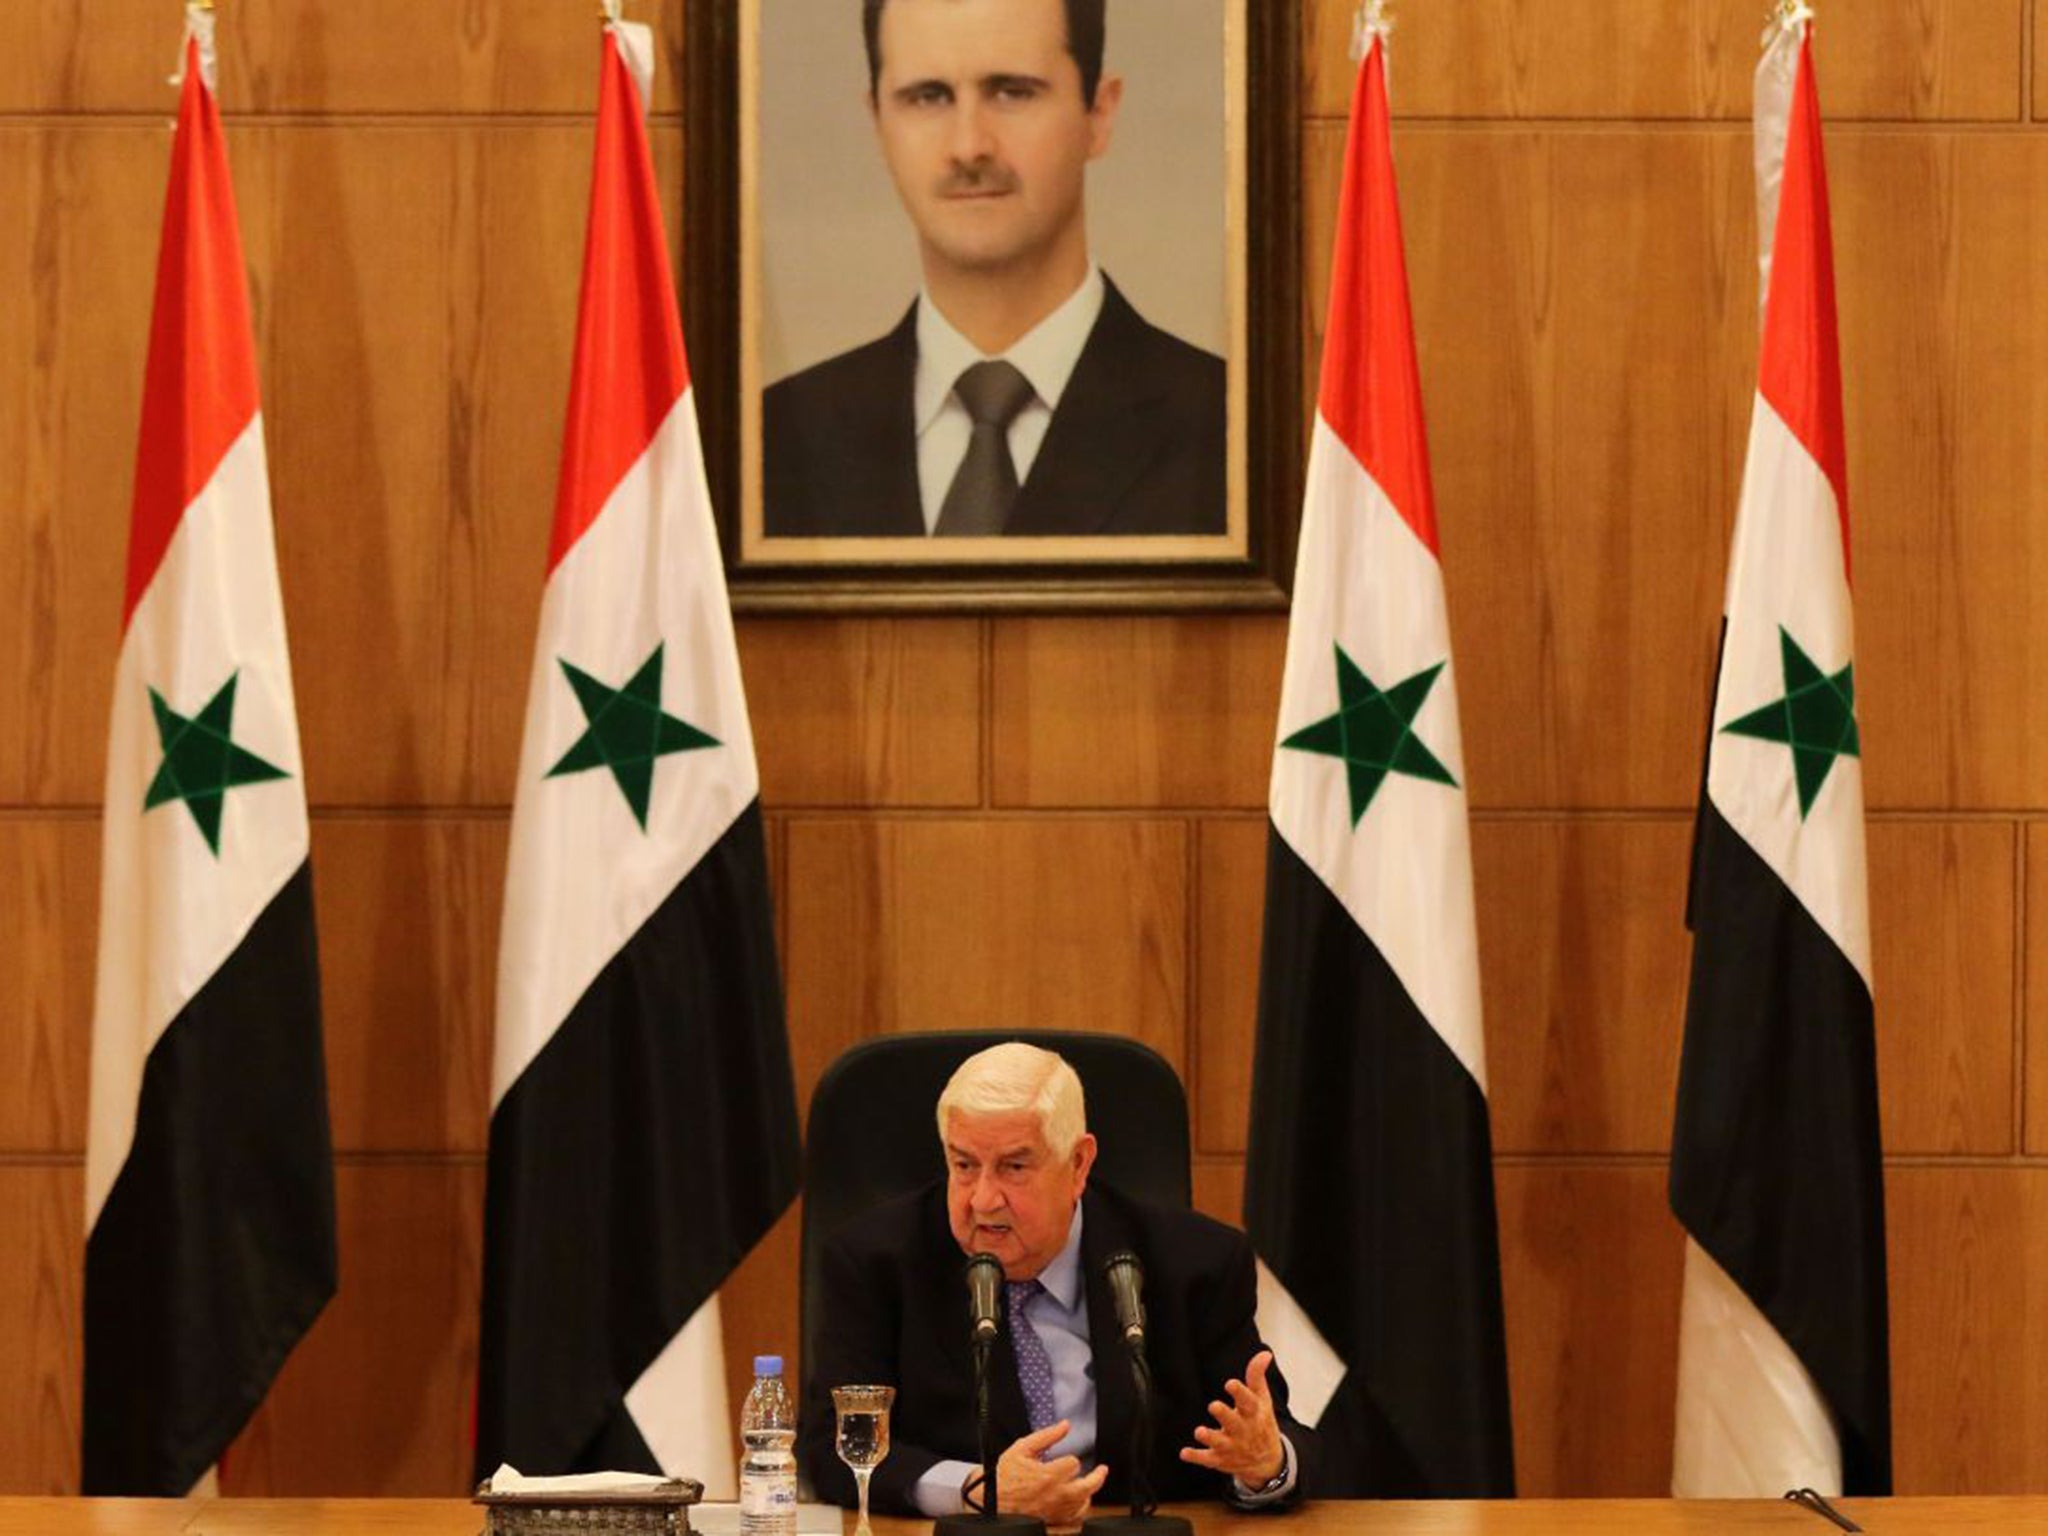 Syria’s Foreign Minister Walid al-Moualem at Saturday’s press conference